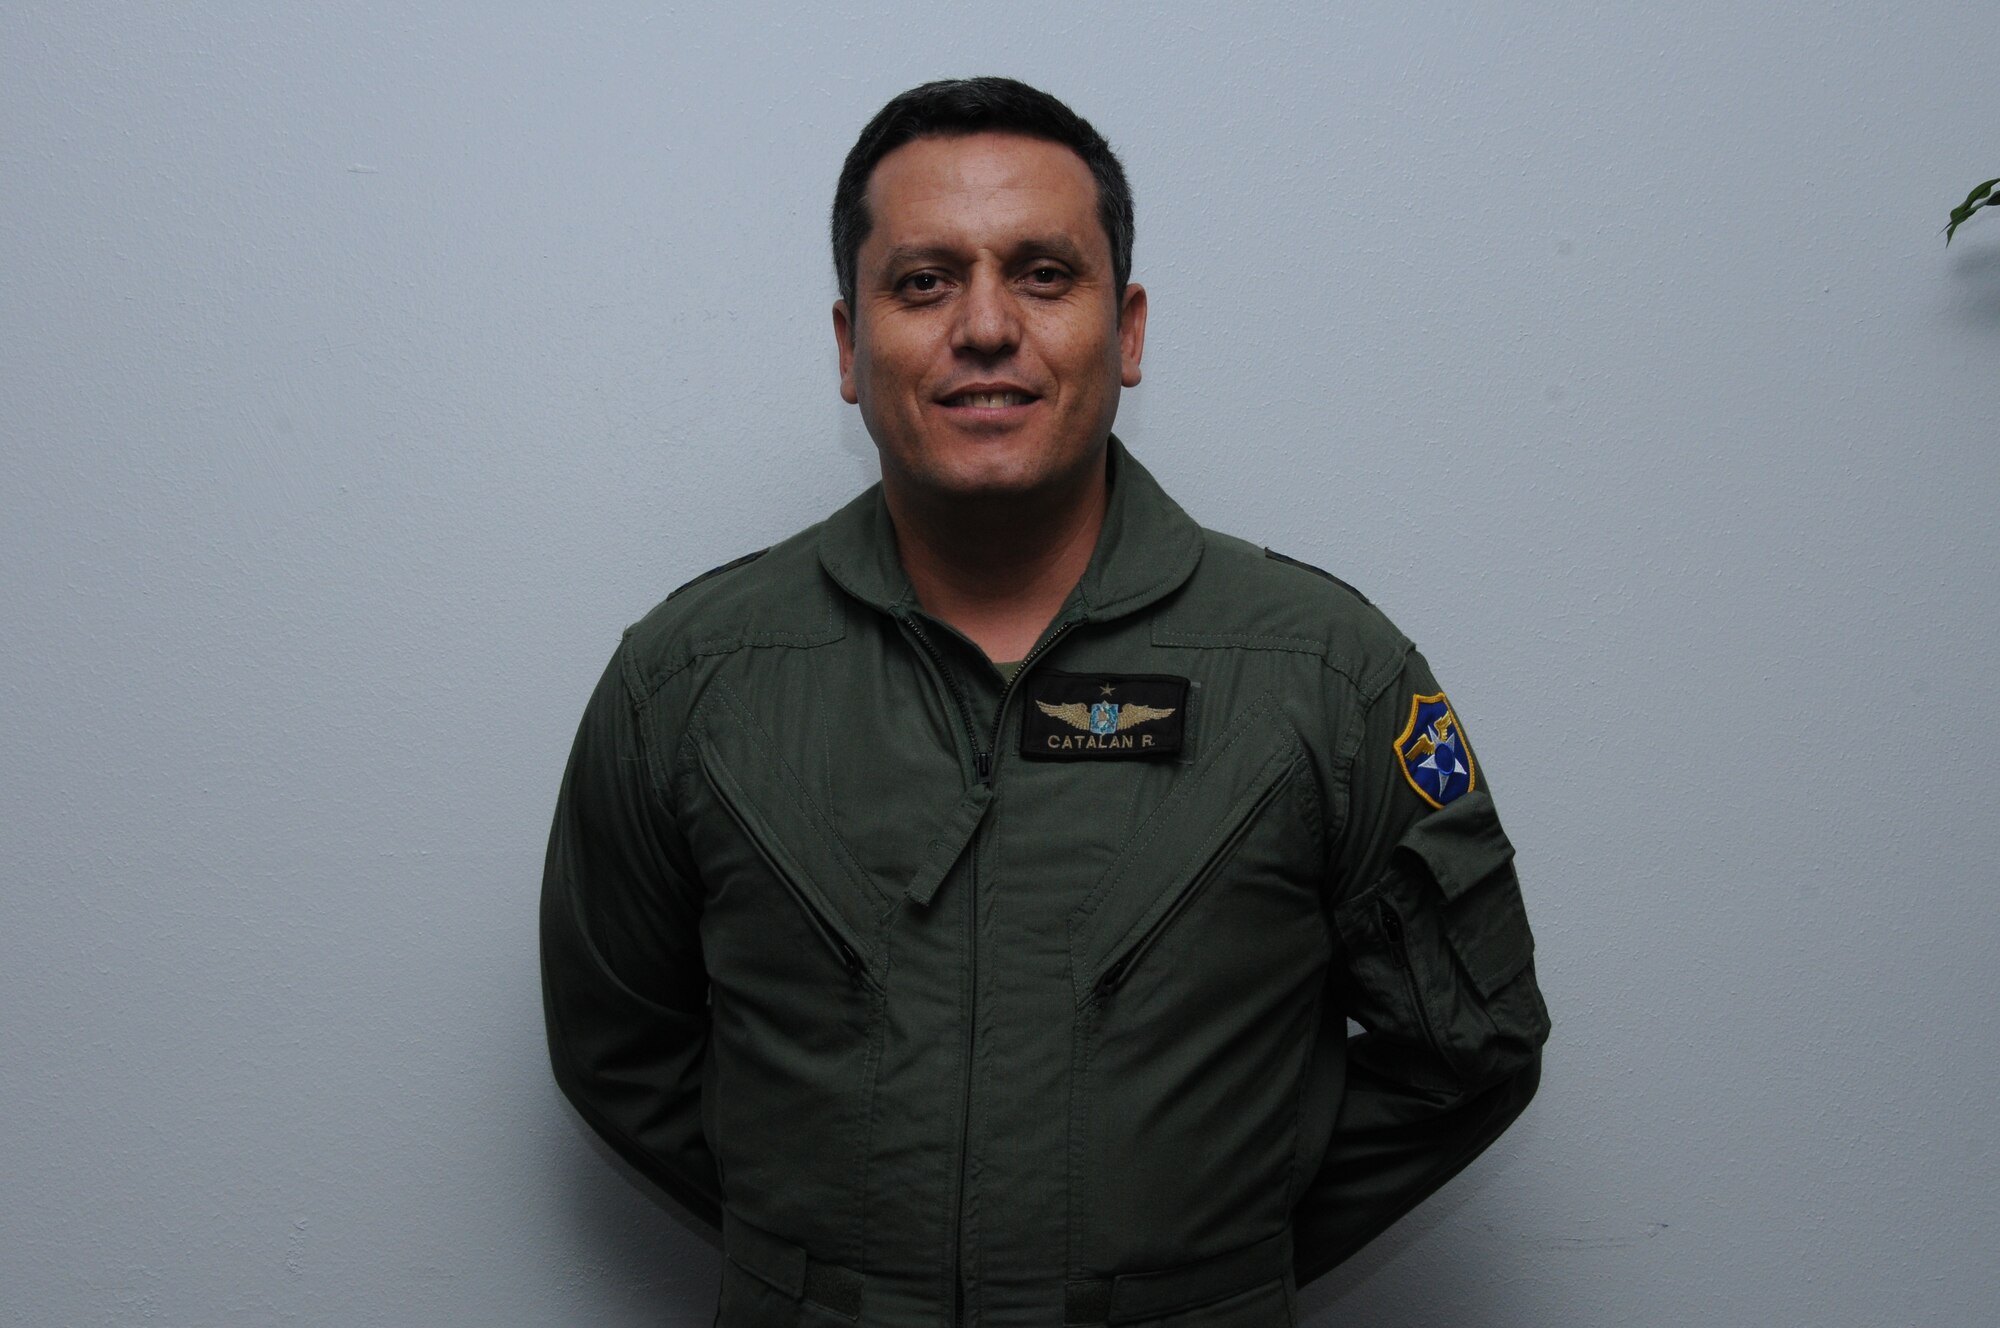 DAVIS-MONTHAN AIR FORCE BASE, Ariz. –  Col. Sergio Catalan, officer of operations for the Guatemalan air force, worked combat operations  for PANAMAX 2012 with Air Forces Southern, Aug. 6-17.  PANAMAX is an annual U.S. Southern Command-sponsored exercise that focuses on ensuring the defense of the Panama Canal.  One of the most important benefits of multinational exercises like PANAMAX is the fact that all the participants are able to exchange their experiences, expertise gained new knowledge about each other’s culture and people.  These interactions strengthen our bonds across the region and foster long-lasting friendships and an understanding among the partner nations, ultimately benefiting the security of the region. (USAF photo by Tech. Sgt. Andria Sapp/Released). 